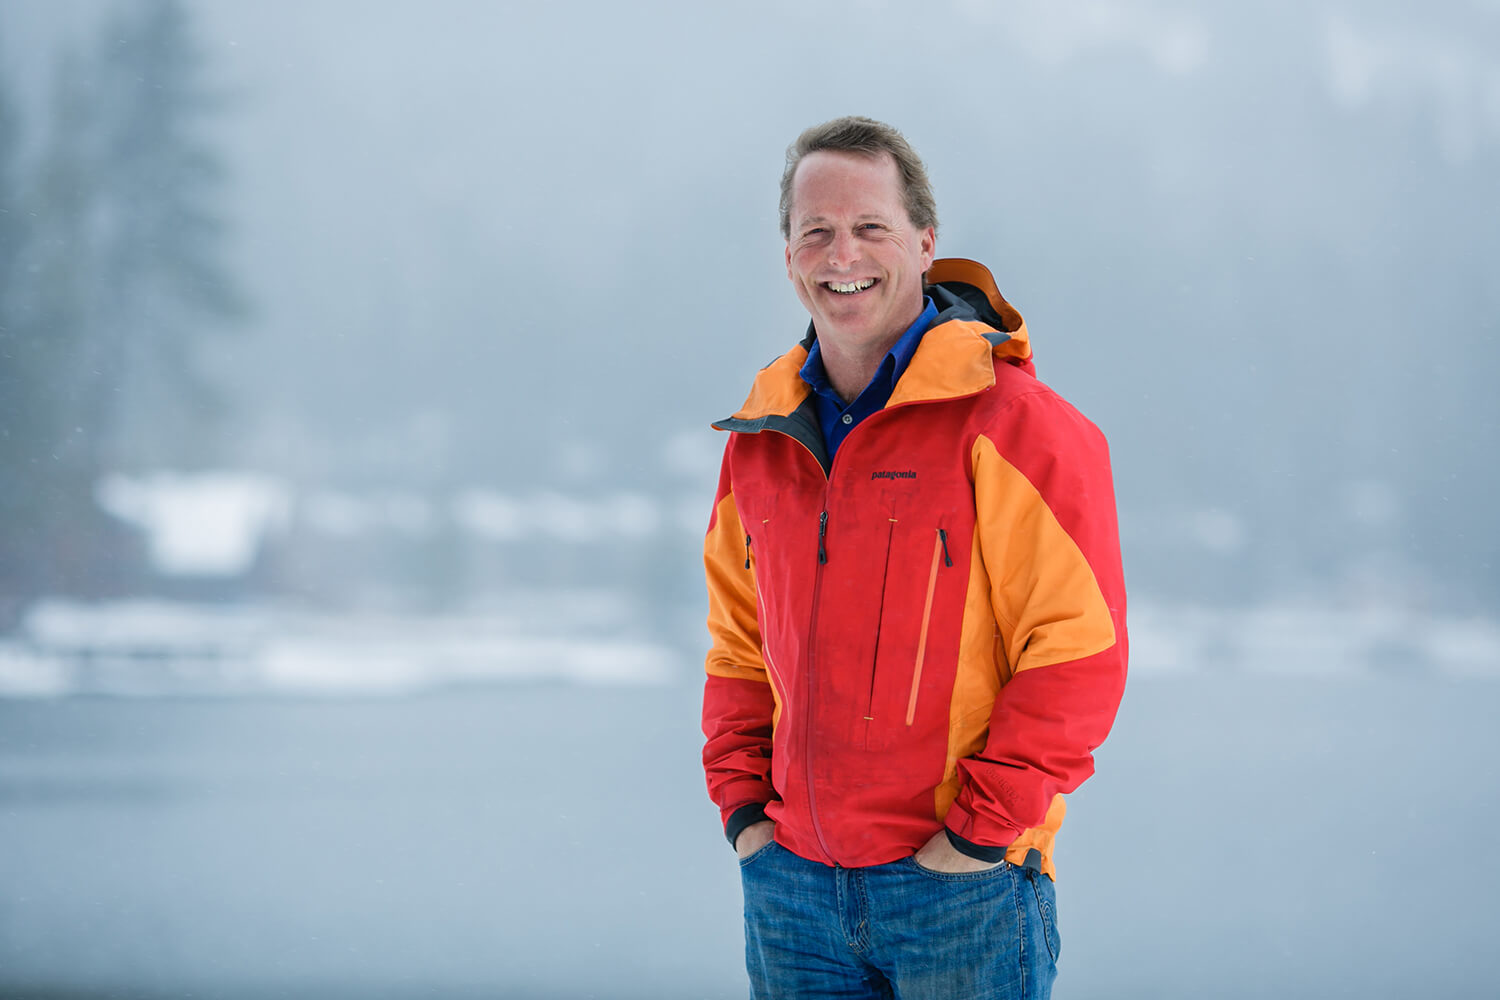 Alpenglow Expeditions' AMGA guide Tim Dobbins